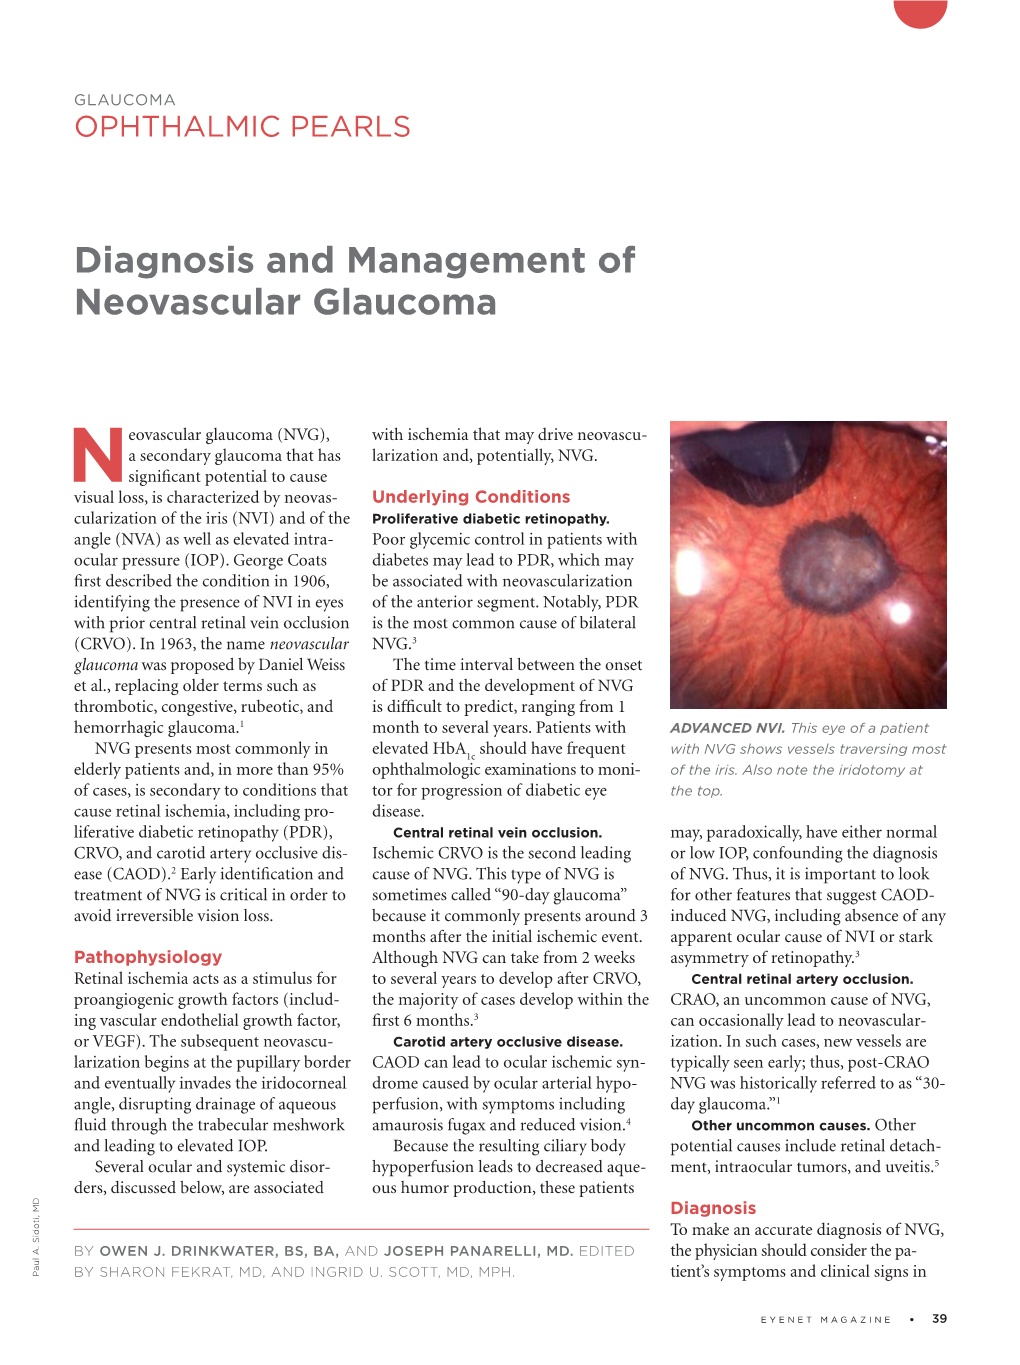 Diagnosis and Management of Neovascular Glaucoma